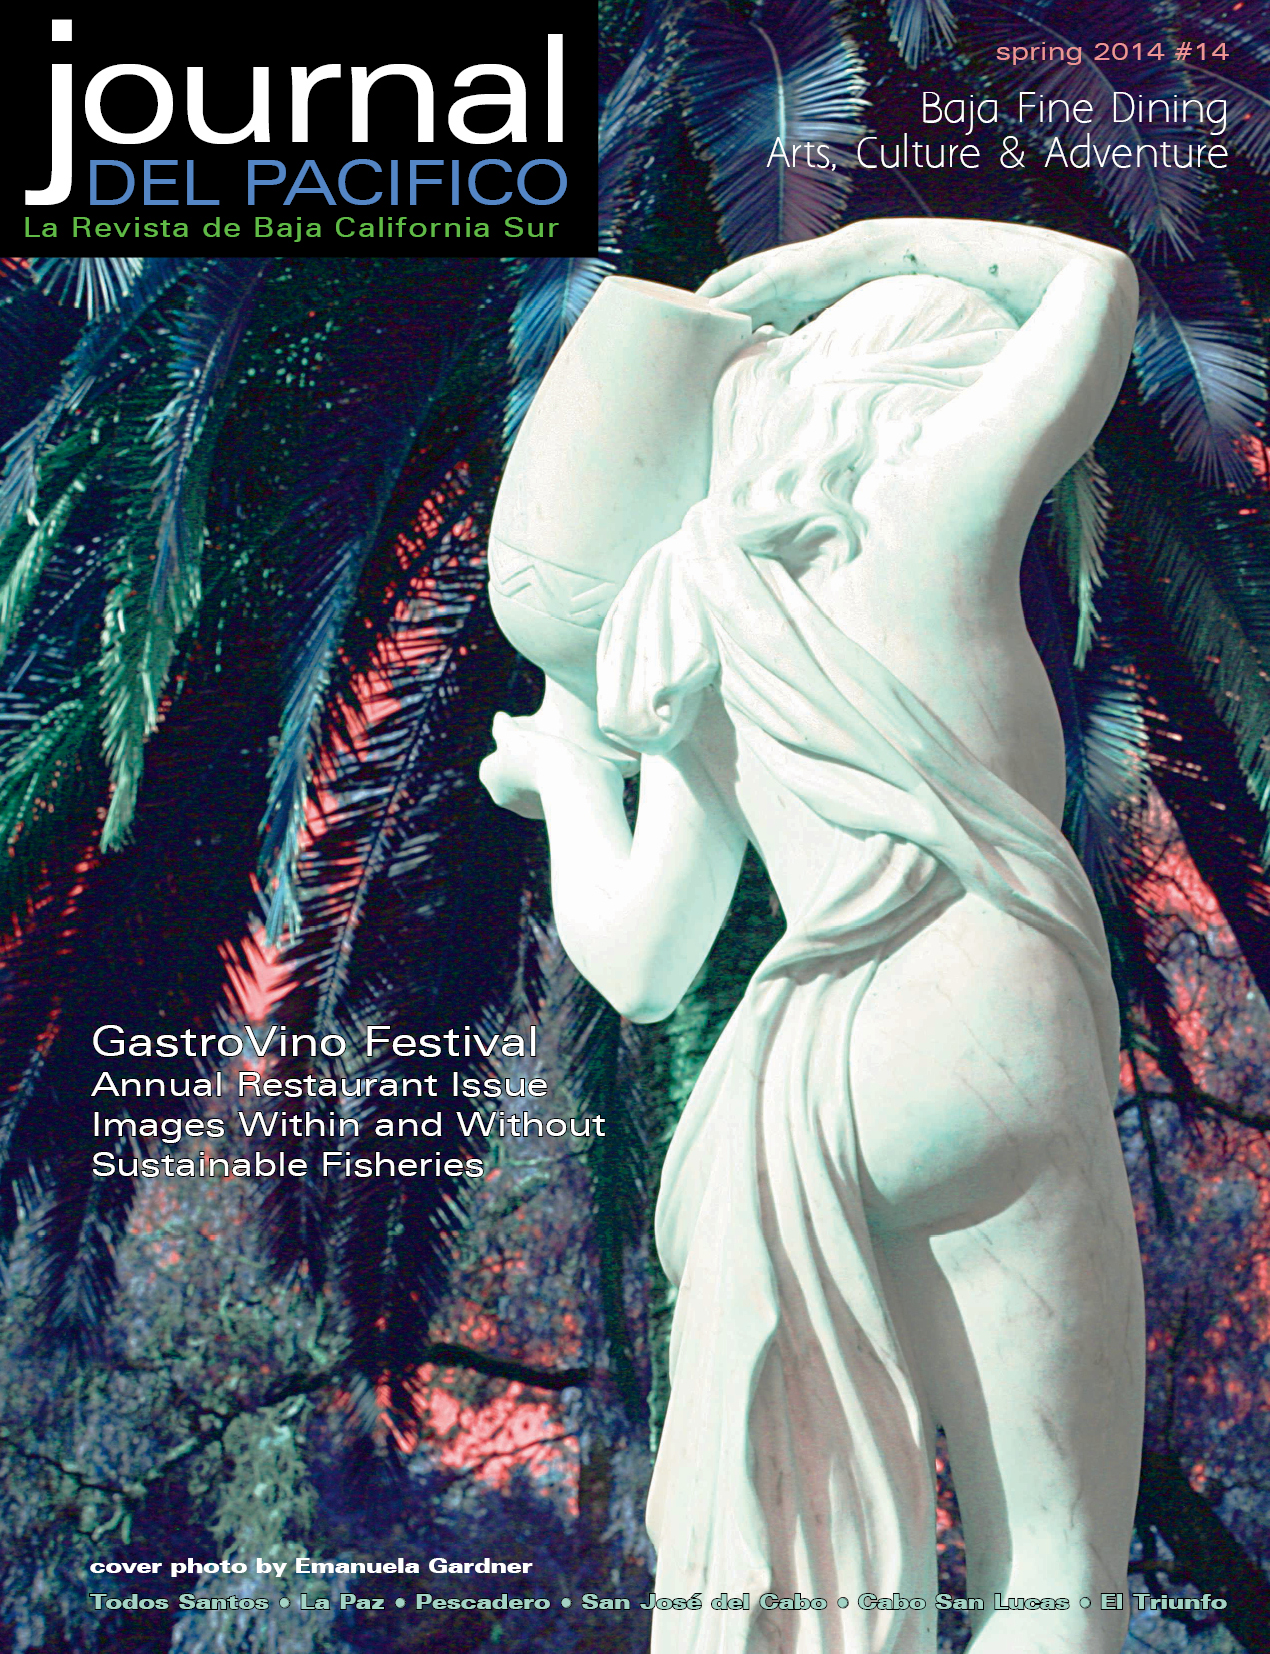 Spring 2014 Issue of Journal del Pacifico